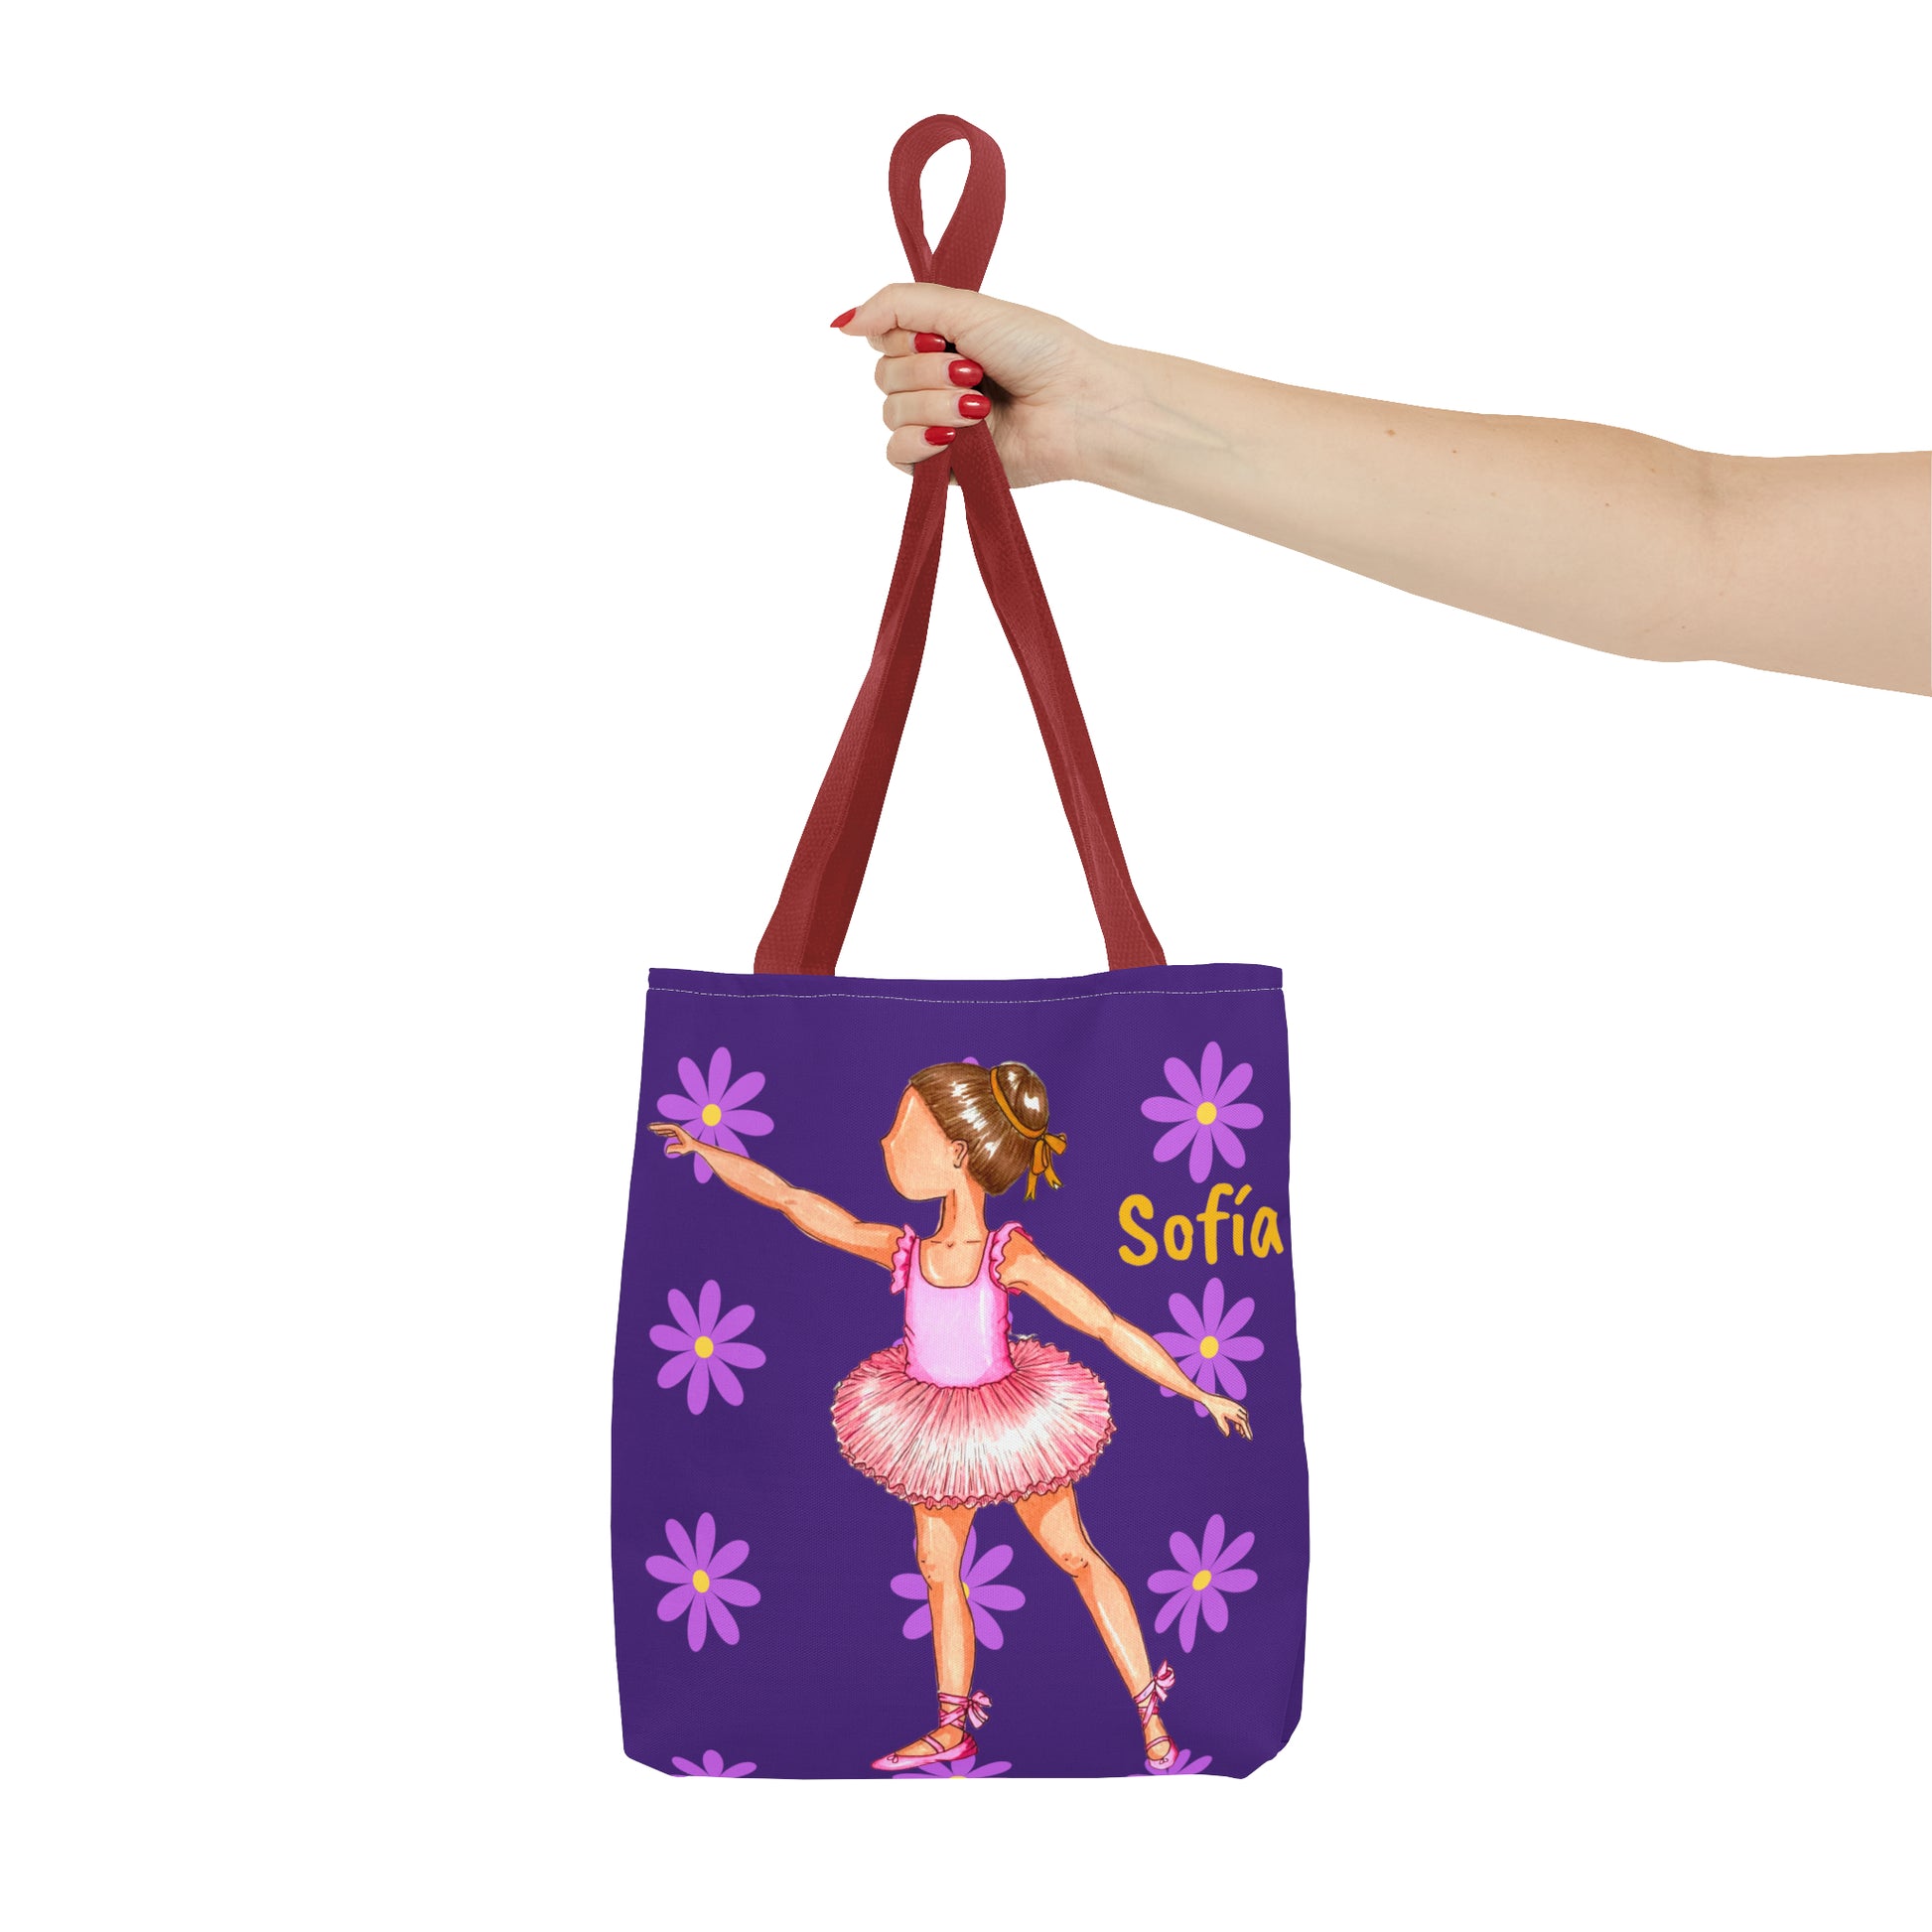 a hand holding a purple tote bag with a picture of a ballerina